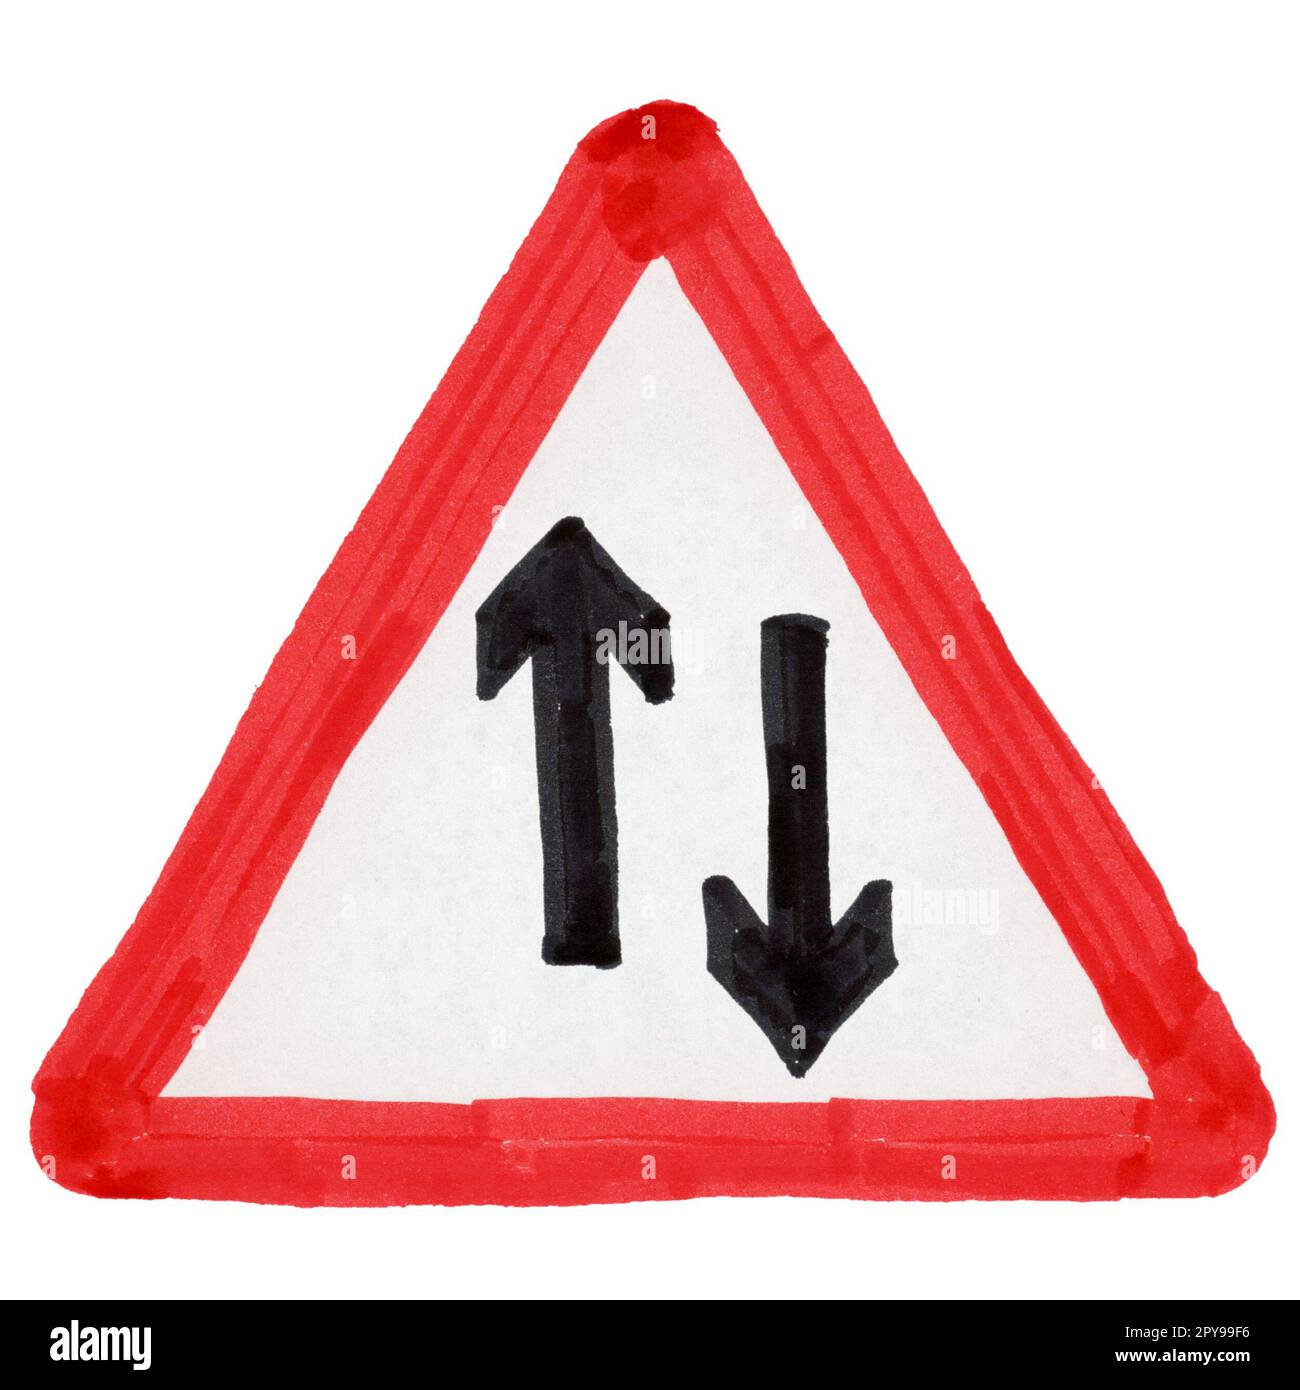 two way traffic sign illustration isolated over white Stock Photo